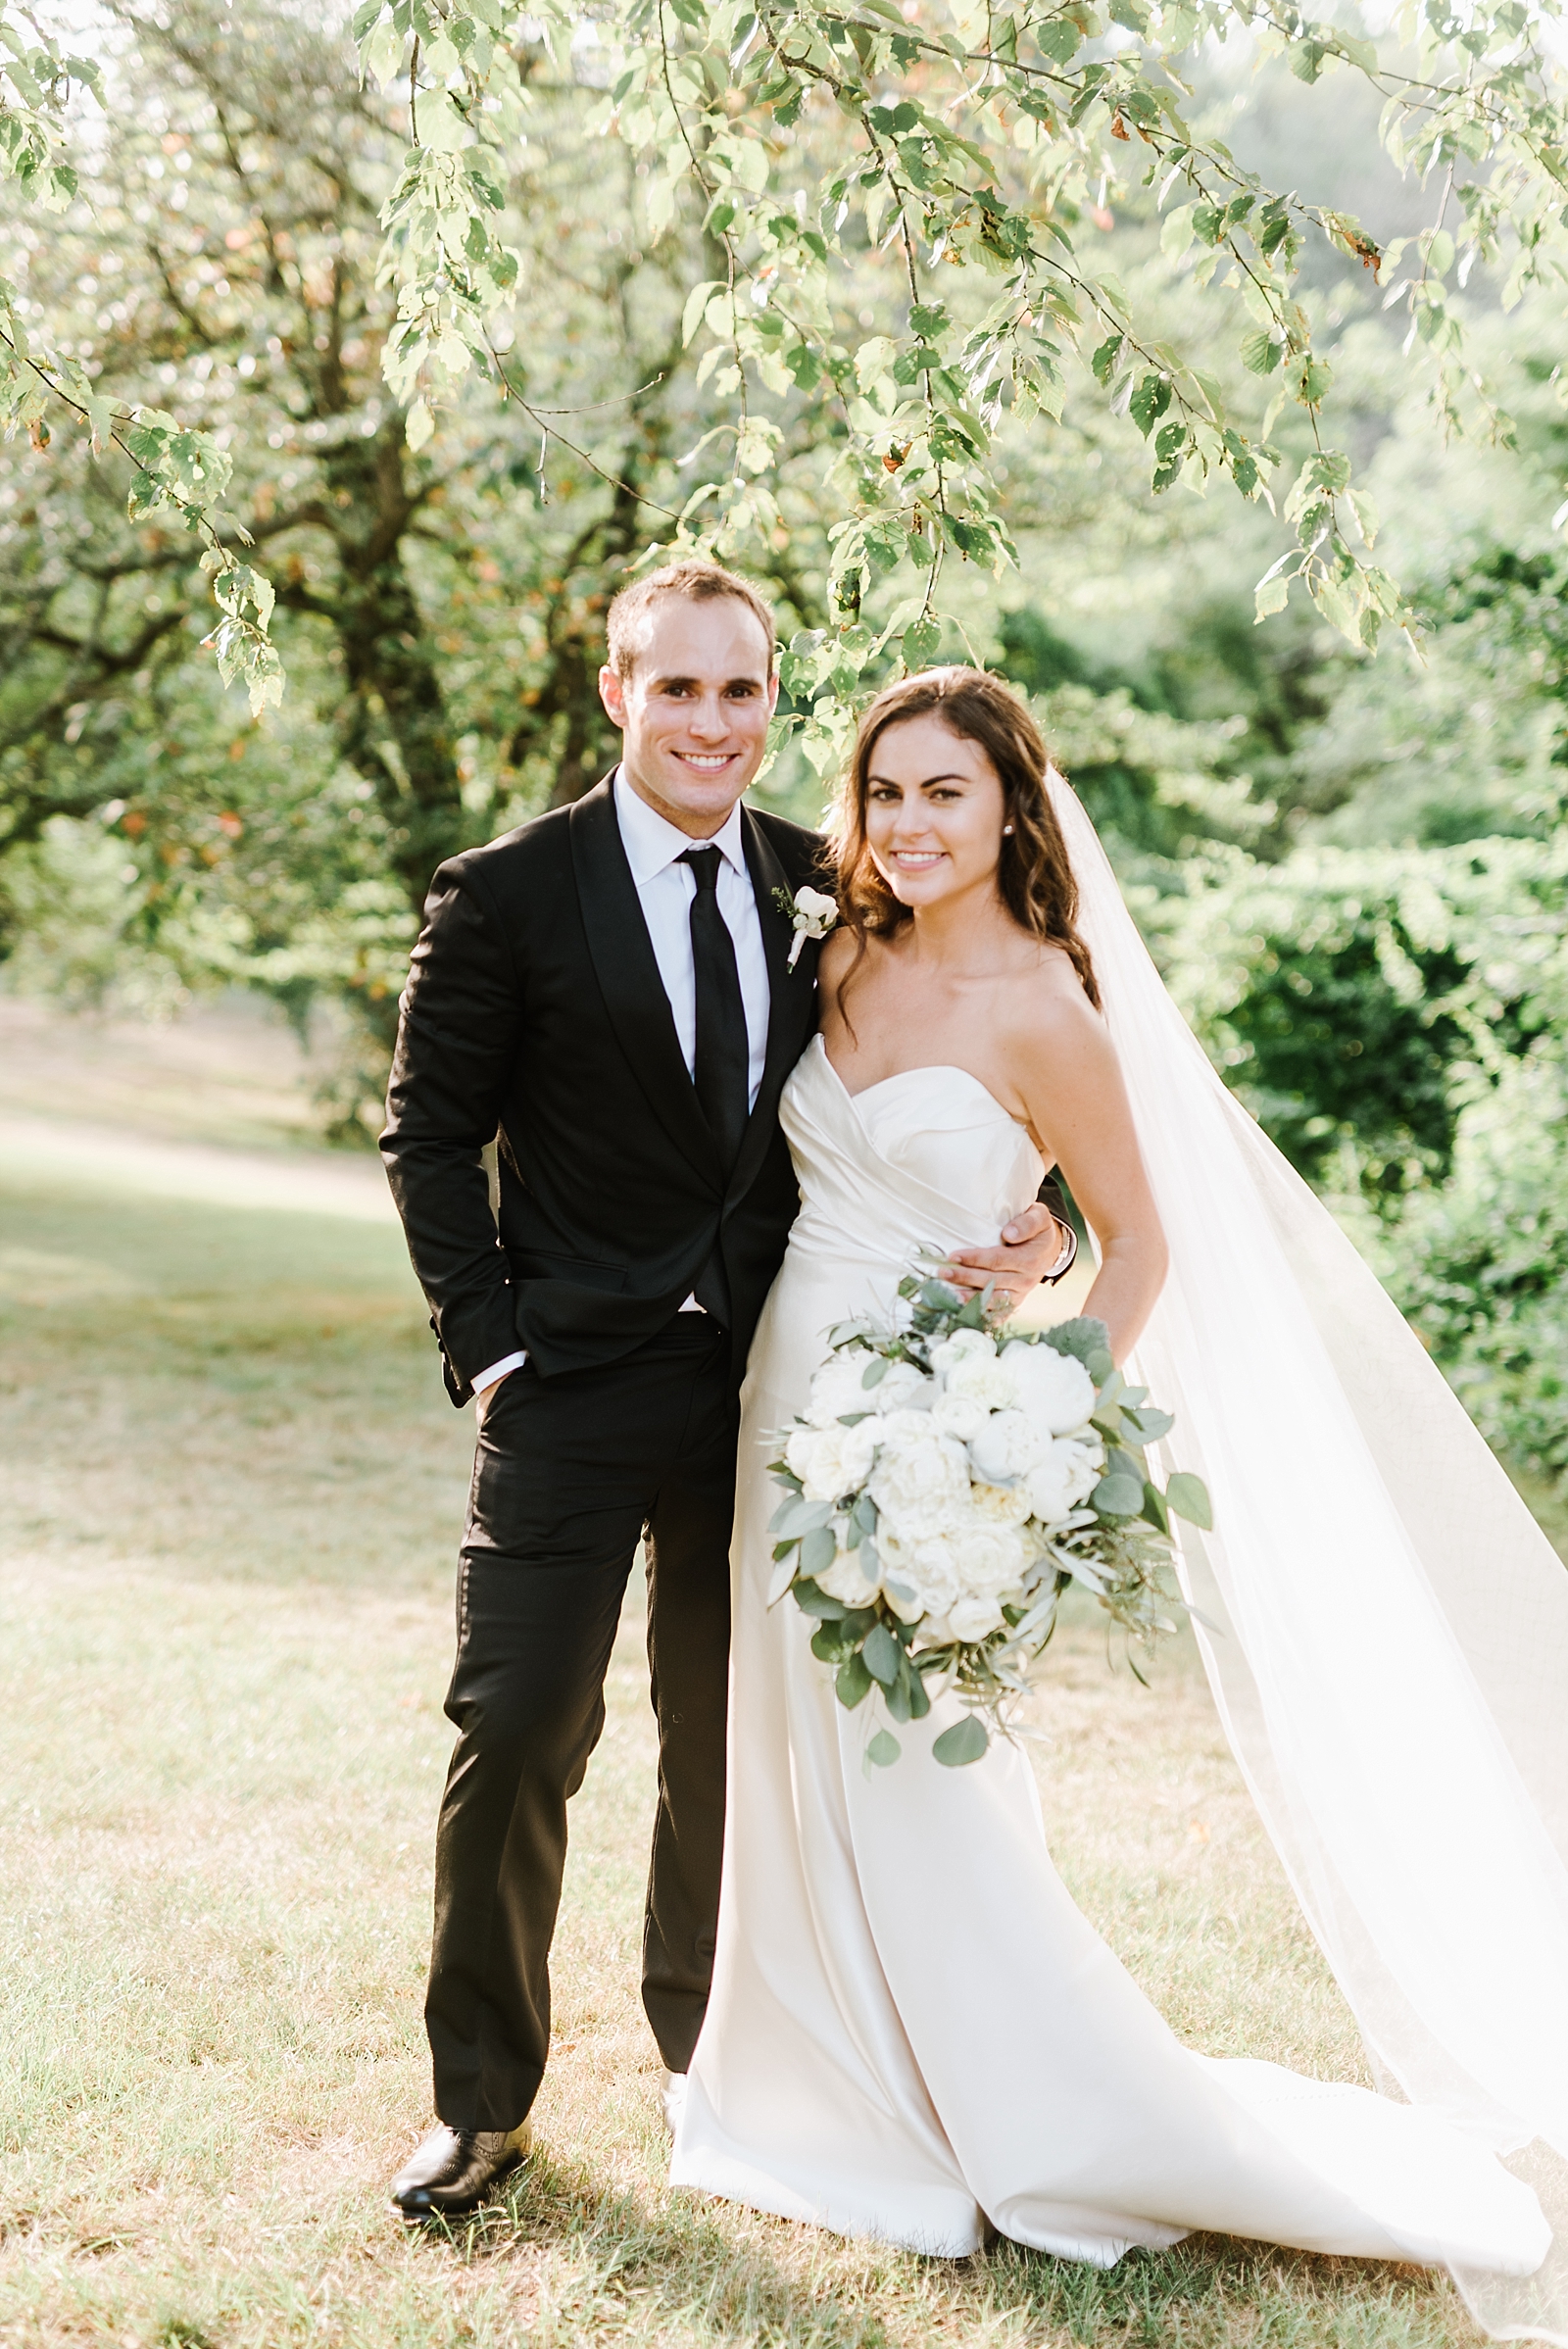 Sunny Summer Wedding at Willowdale Estate in Topsfield, MA by Boston Wedding Photographer Annmarie Swift